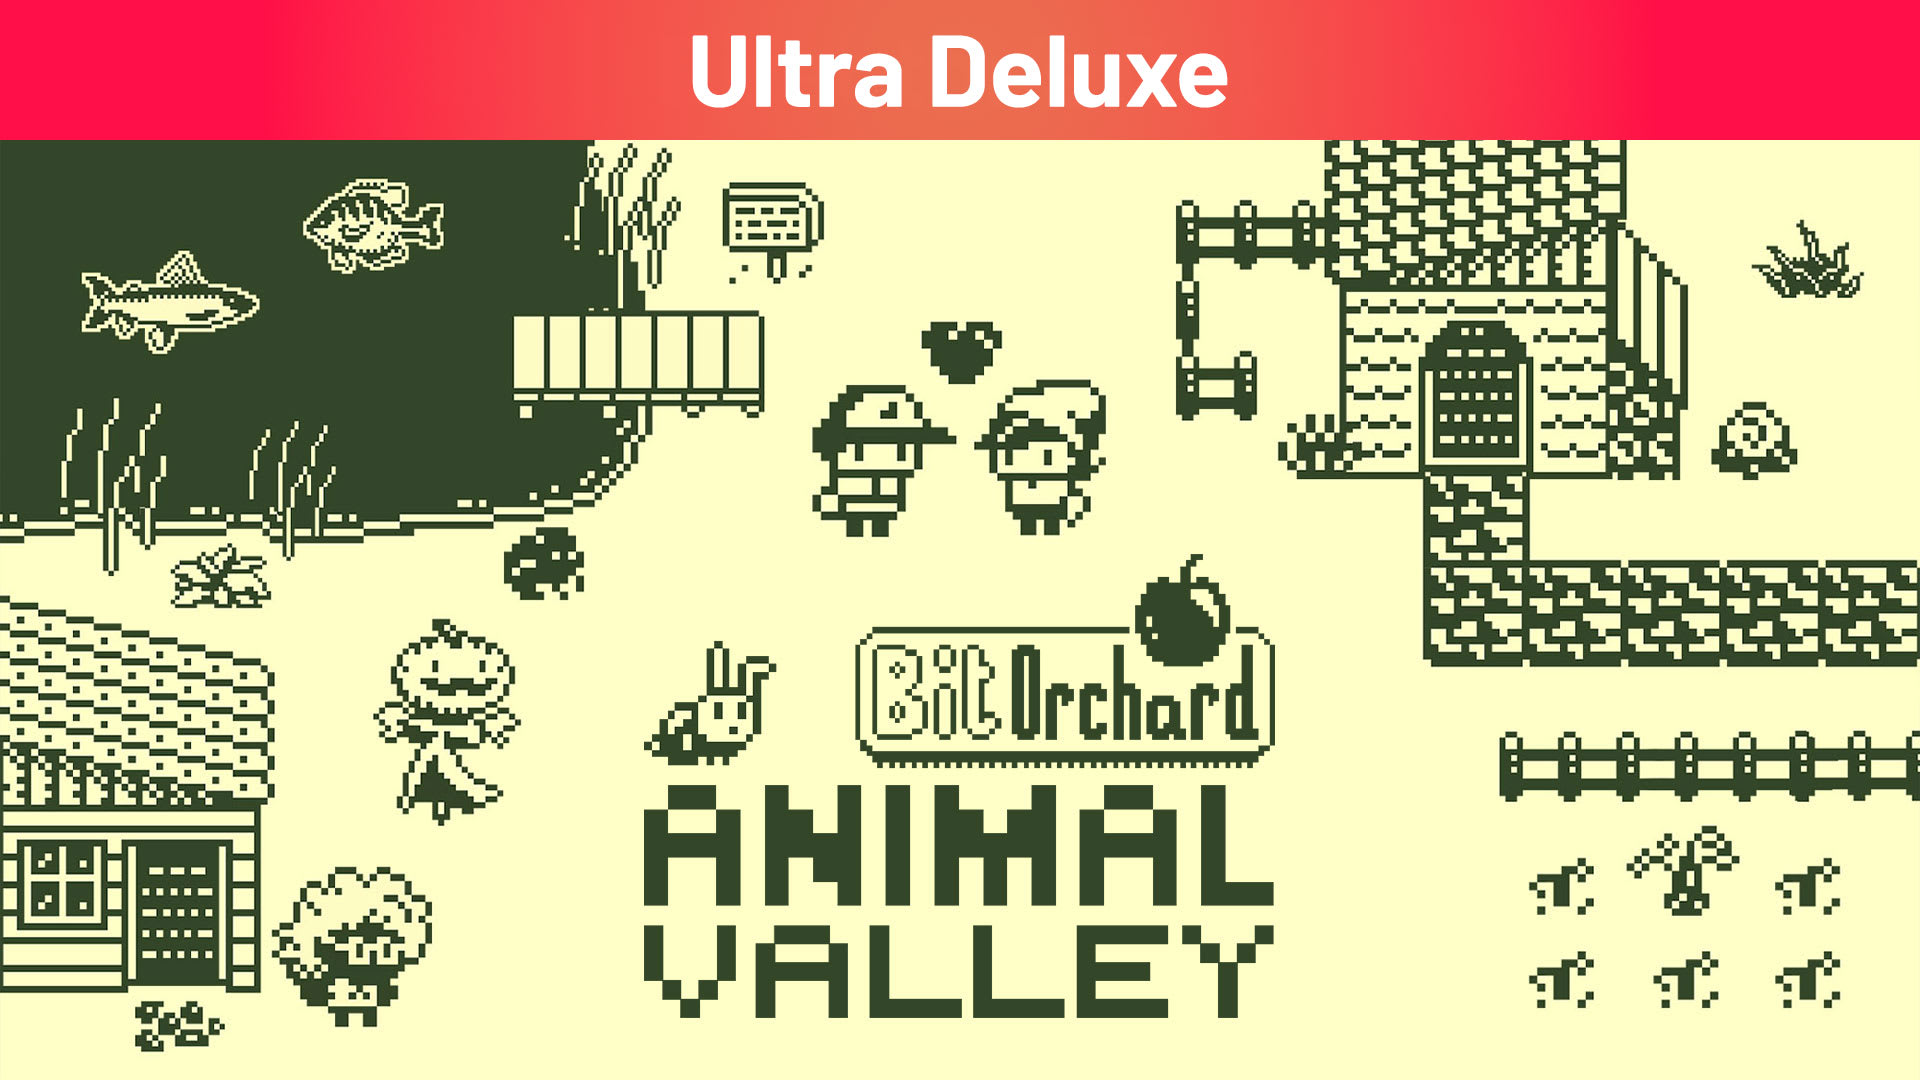 Bit Orchard: Animal Valley Ultra Deluxe